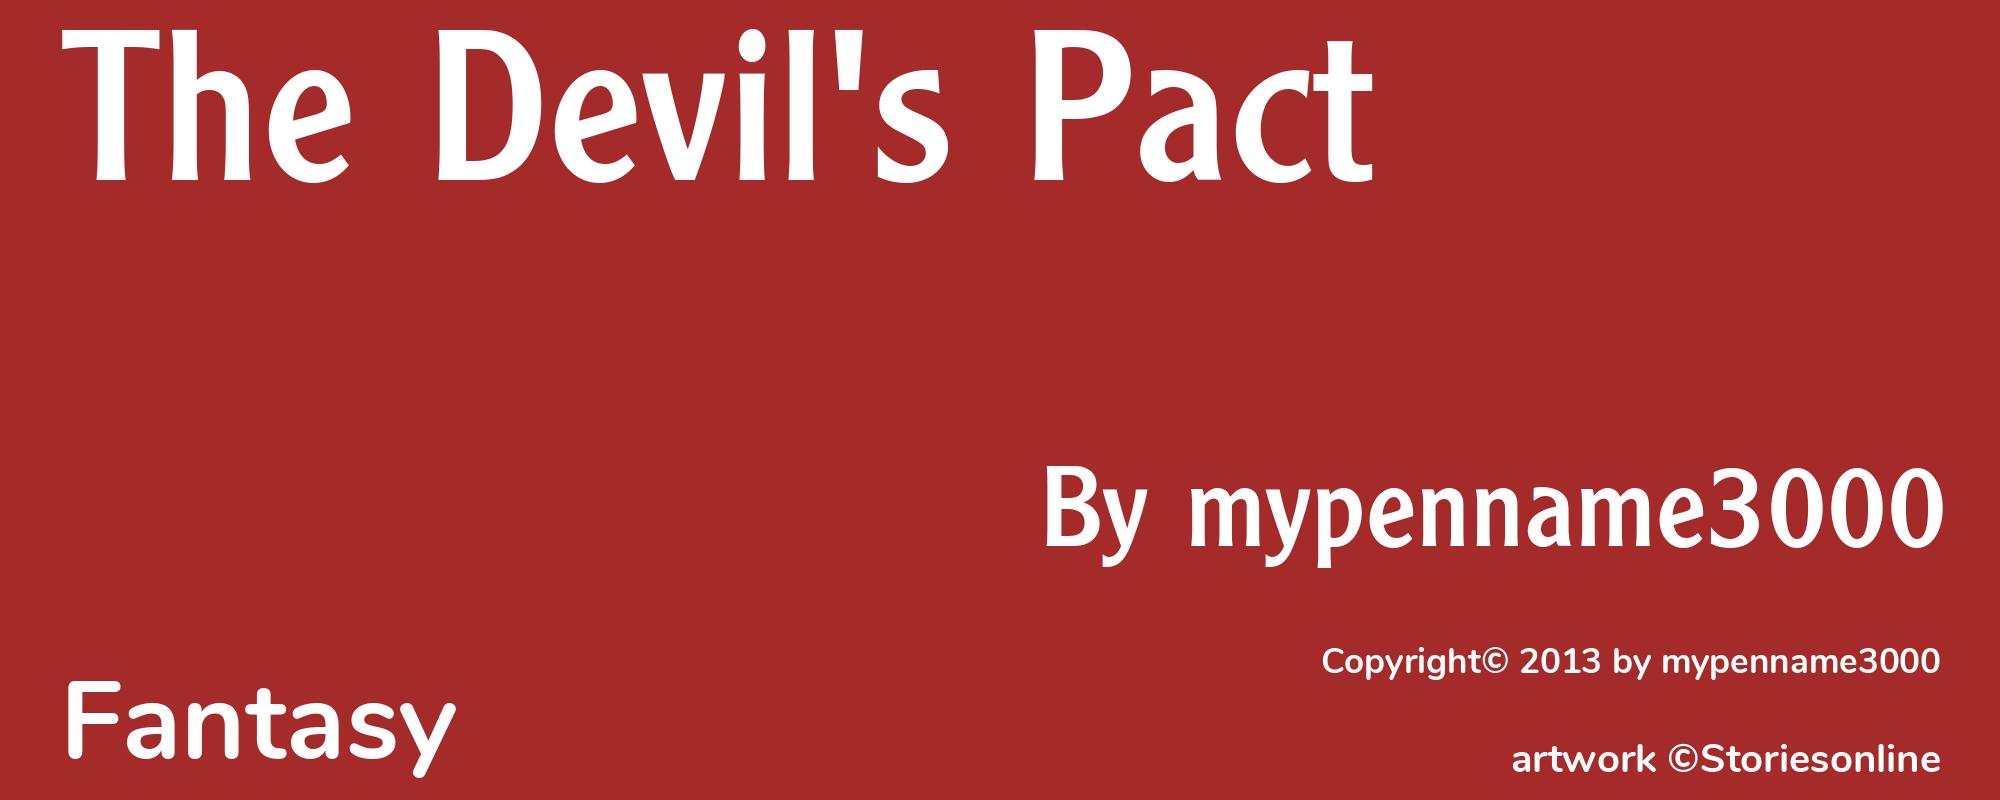 The Devil's Pact - Cover